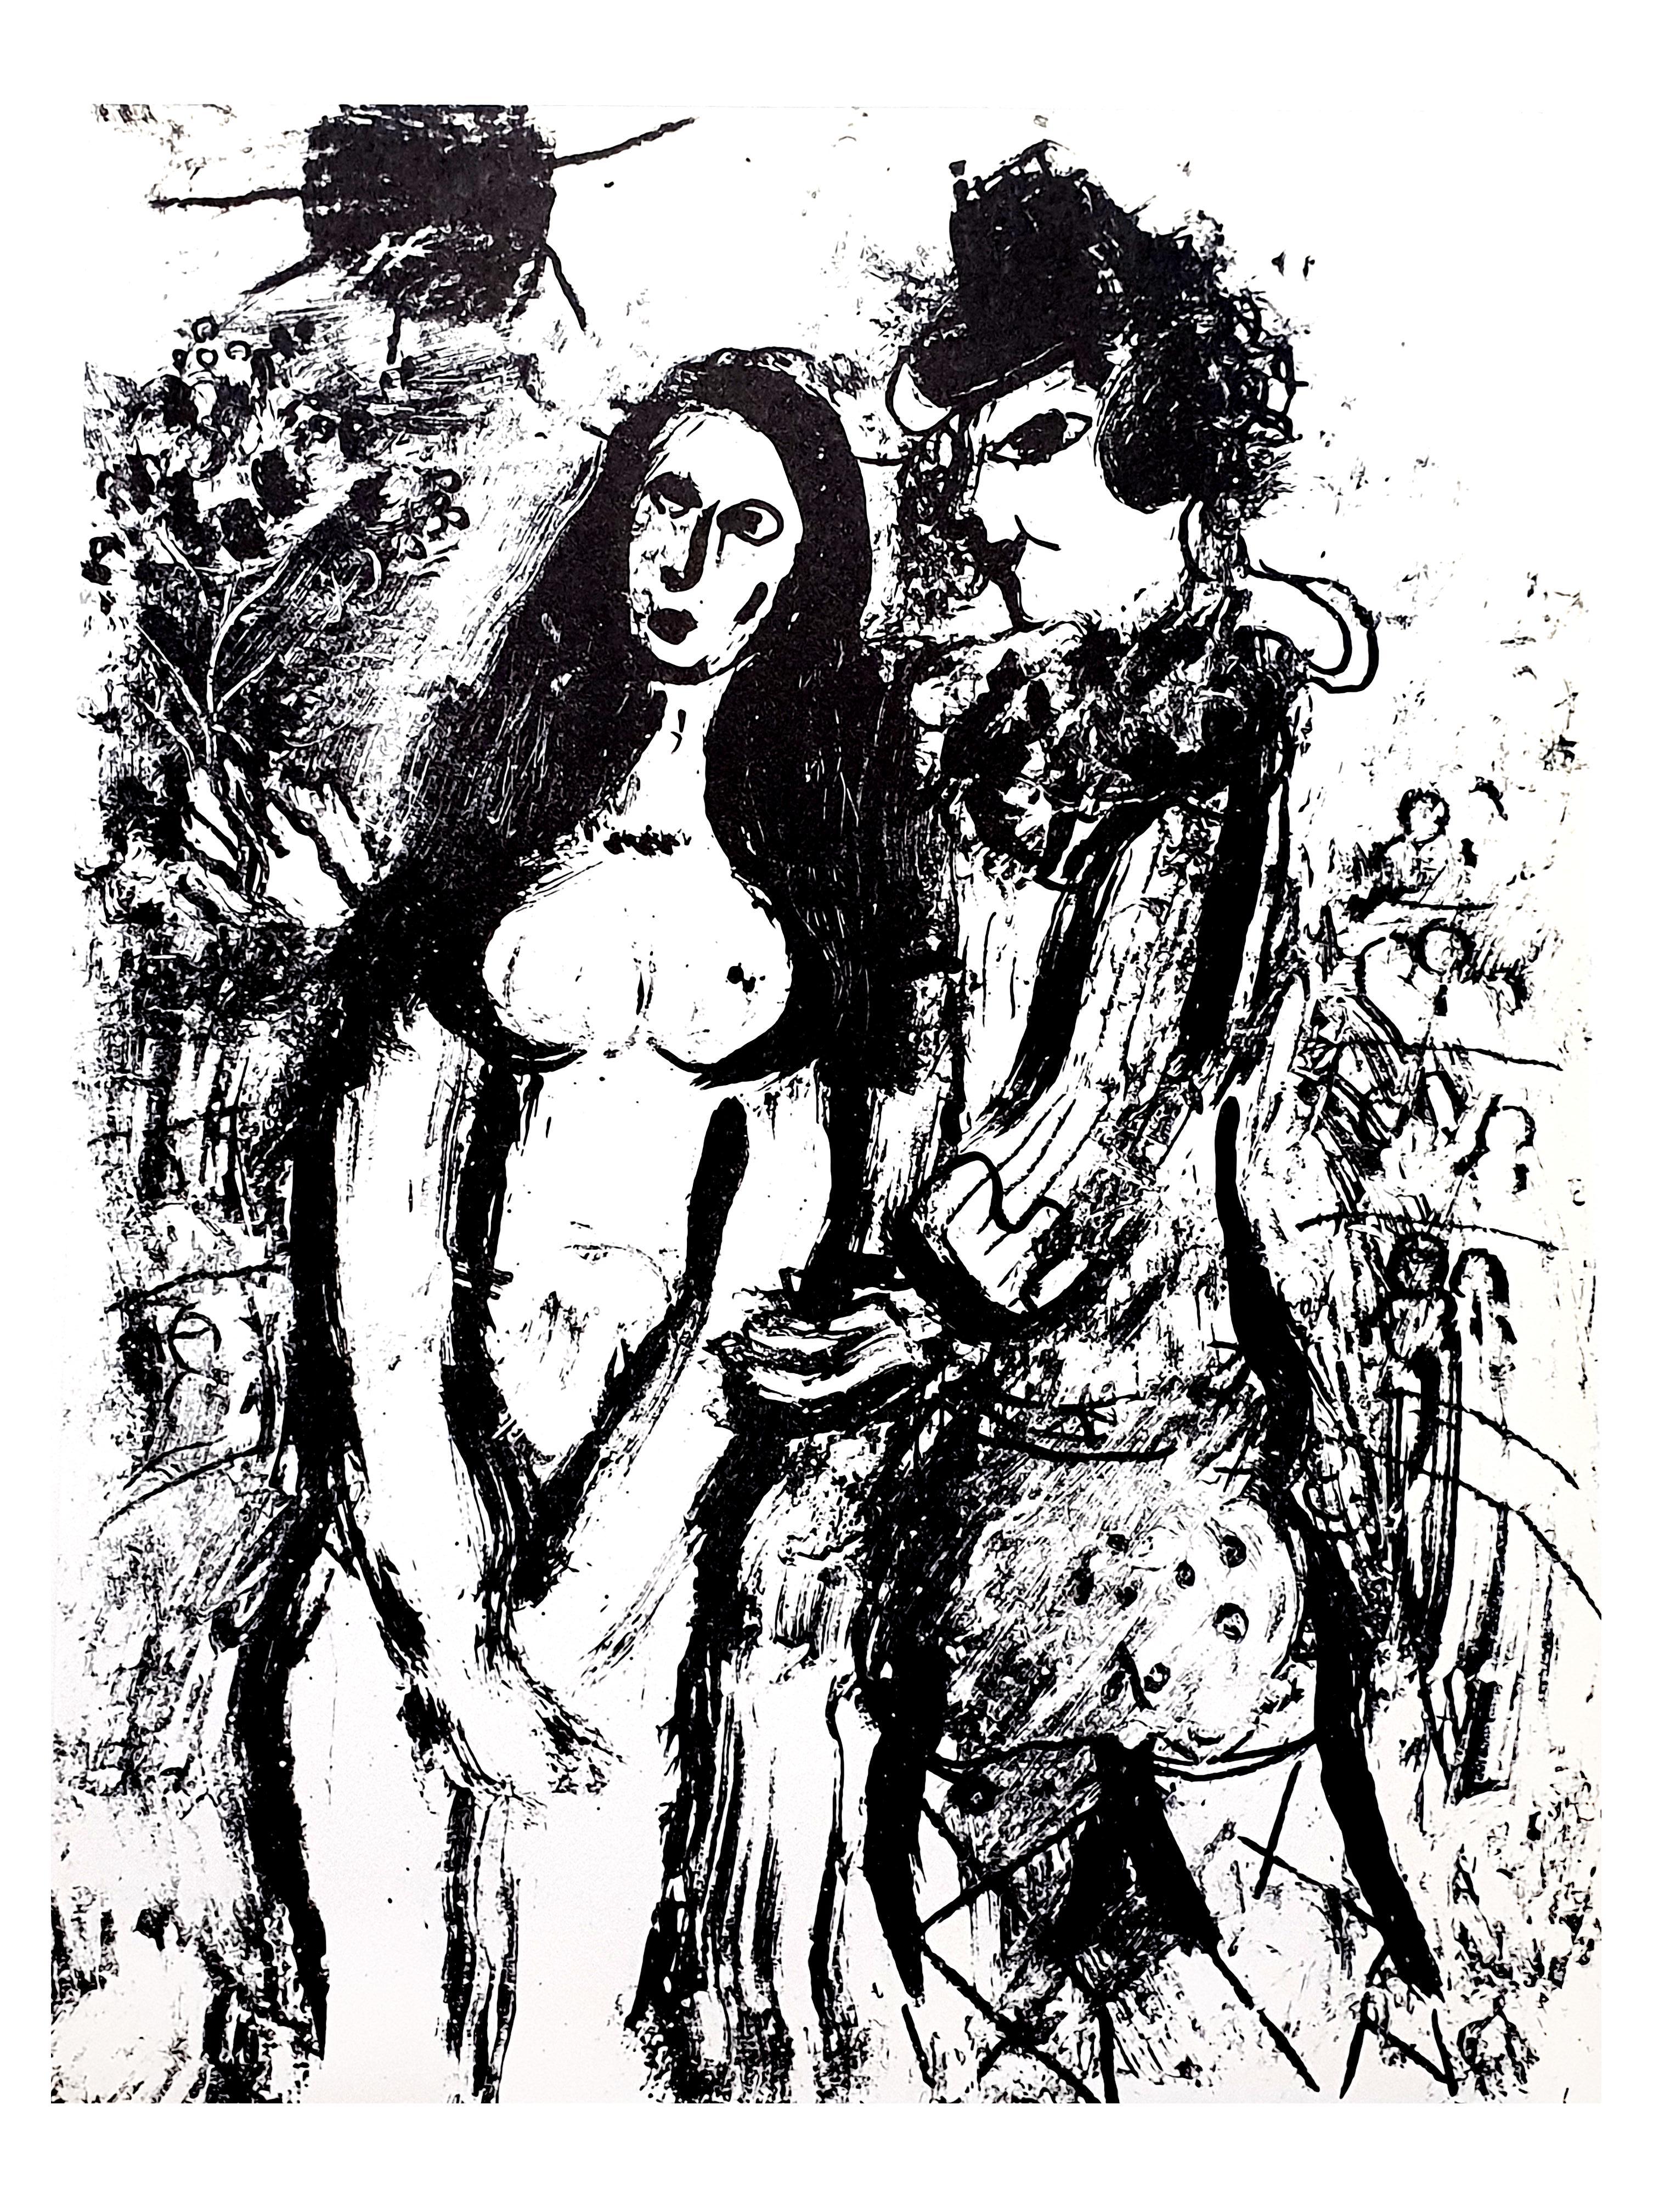 Marc Chagall
Original Lithograph
1963
Dimensions: 32 x 24 cm
Unsigned, as published in "Chagall Lithographe 1957-1962. VOLUME II"
Edition of several thousand
Condition : Excellent

Marc Chagall  (born in 1887)

Marc Chagall was born in Belarus in